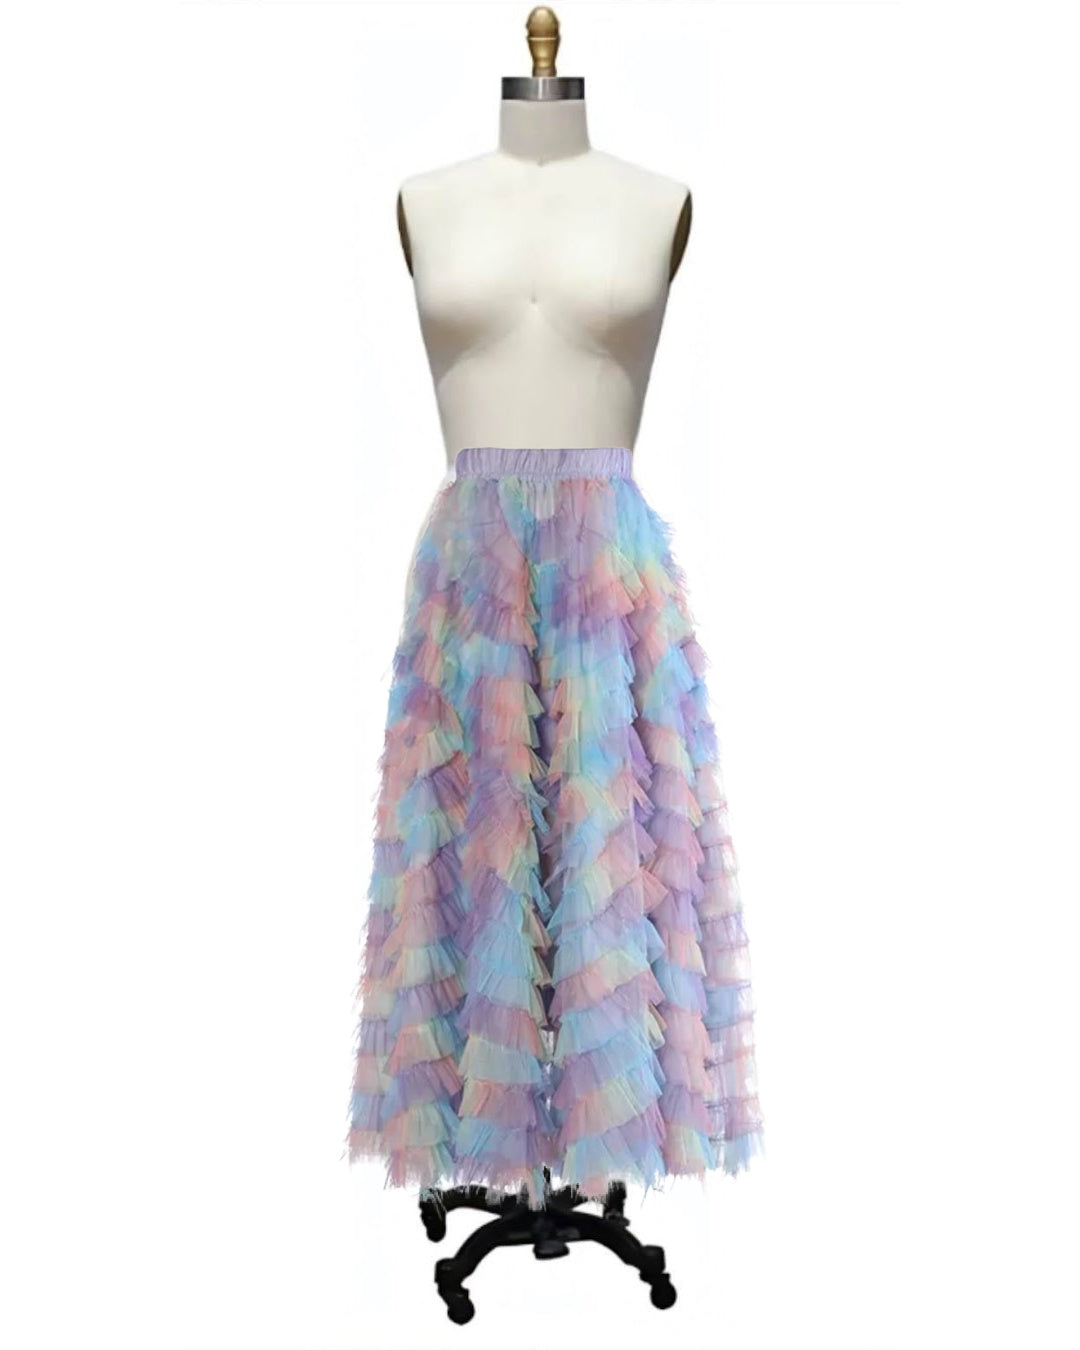 Frosting- the Multicolored Ruffled Tulle Skirt 4 Colors